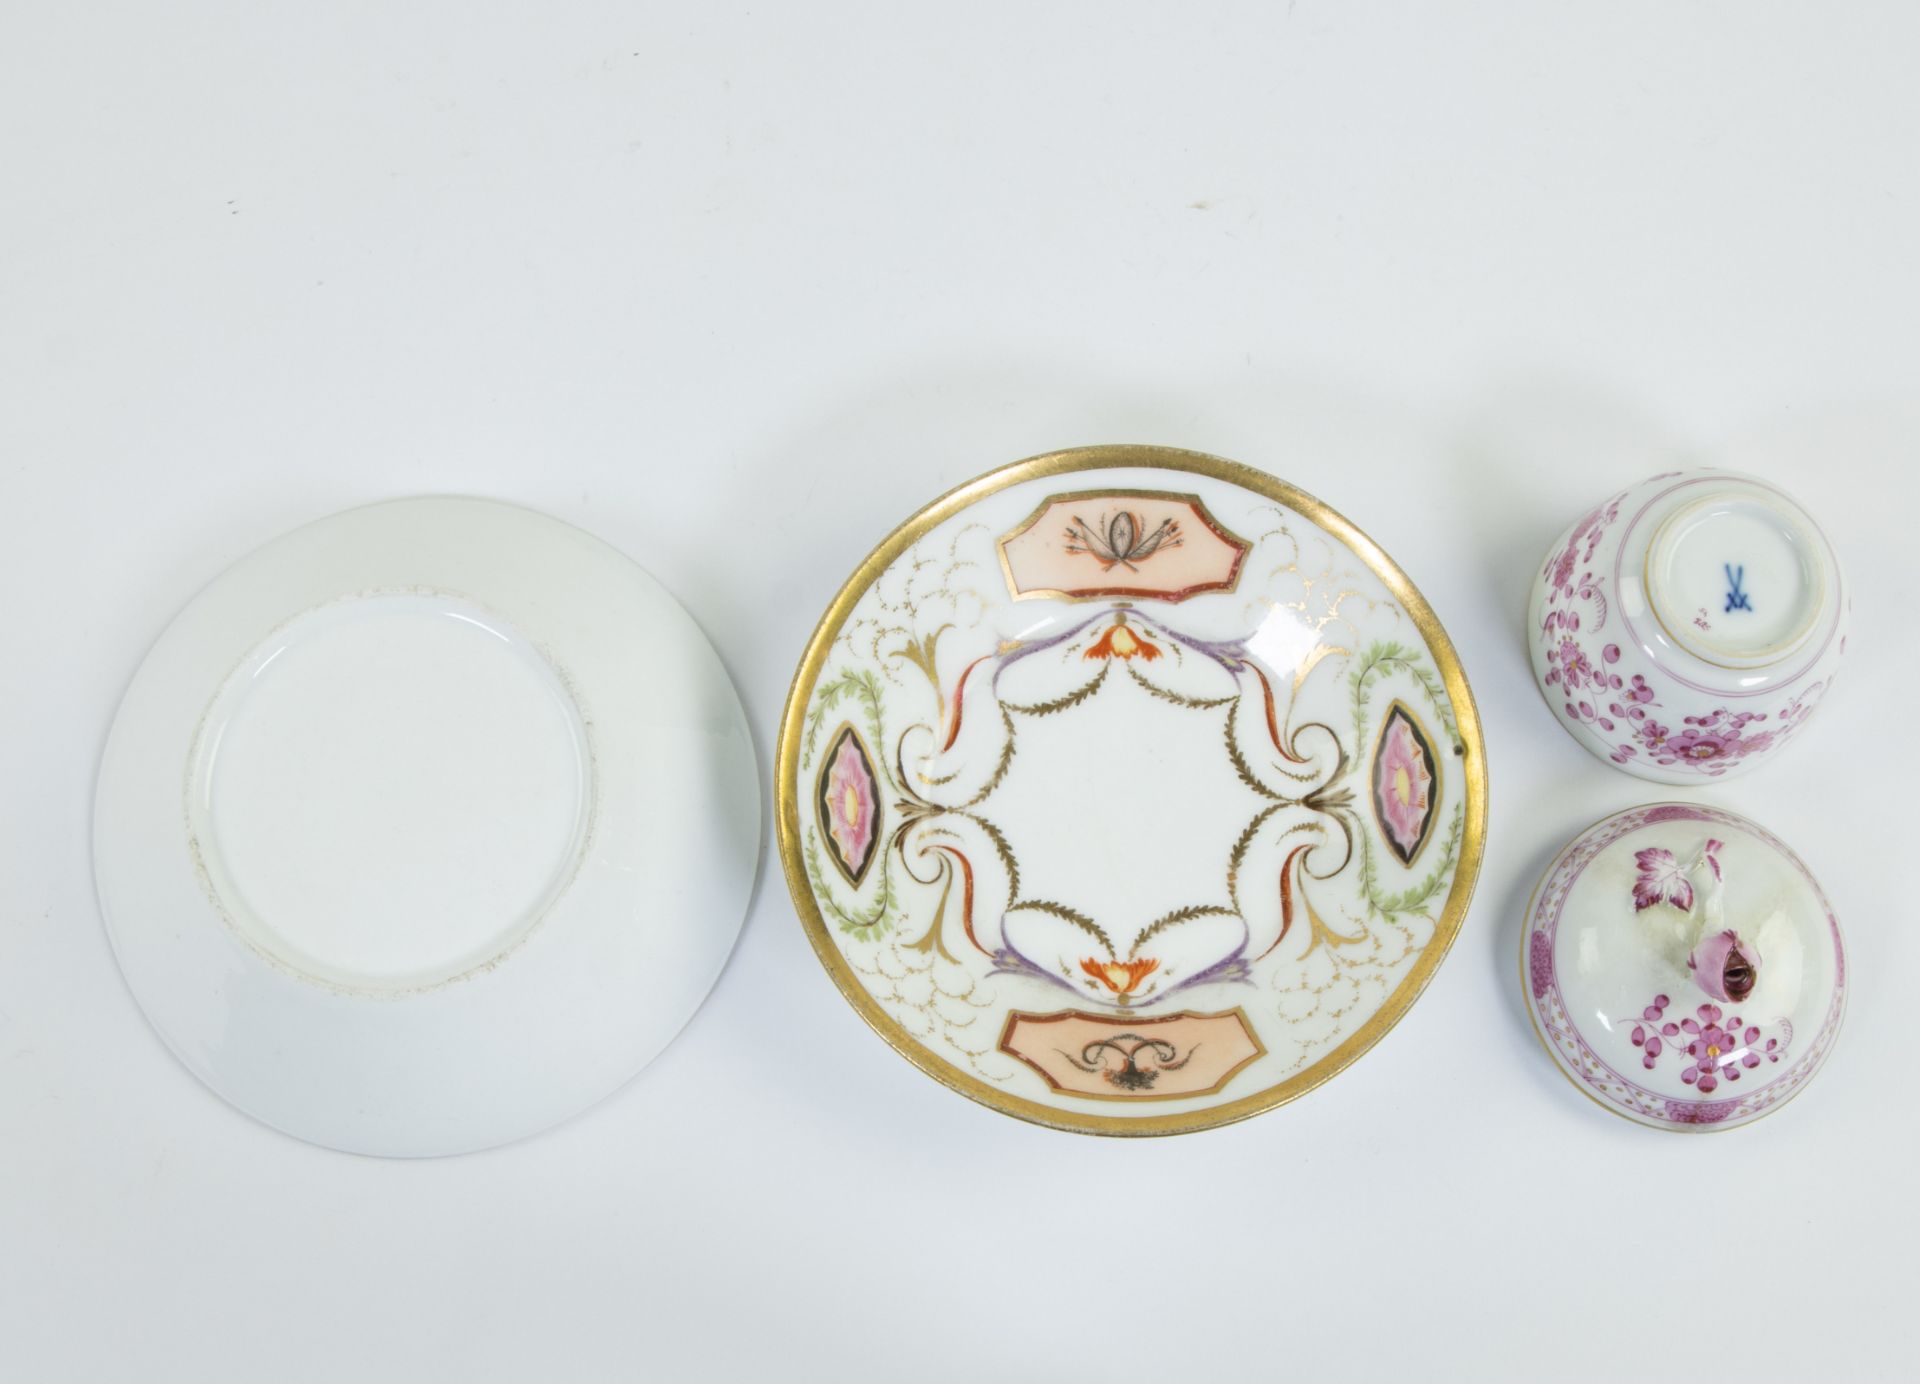 Collection of porcelain: 2 cups early 19th century Paris, tea caddy Meissen 18th century, pastoral g - Image 5 of 6